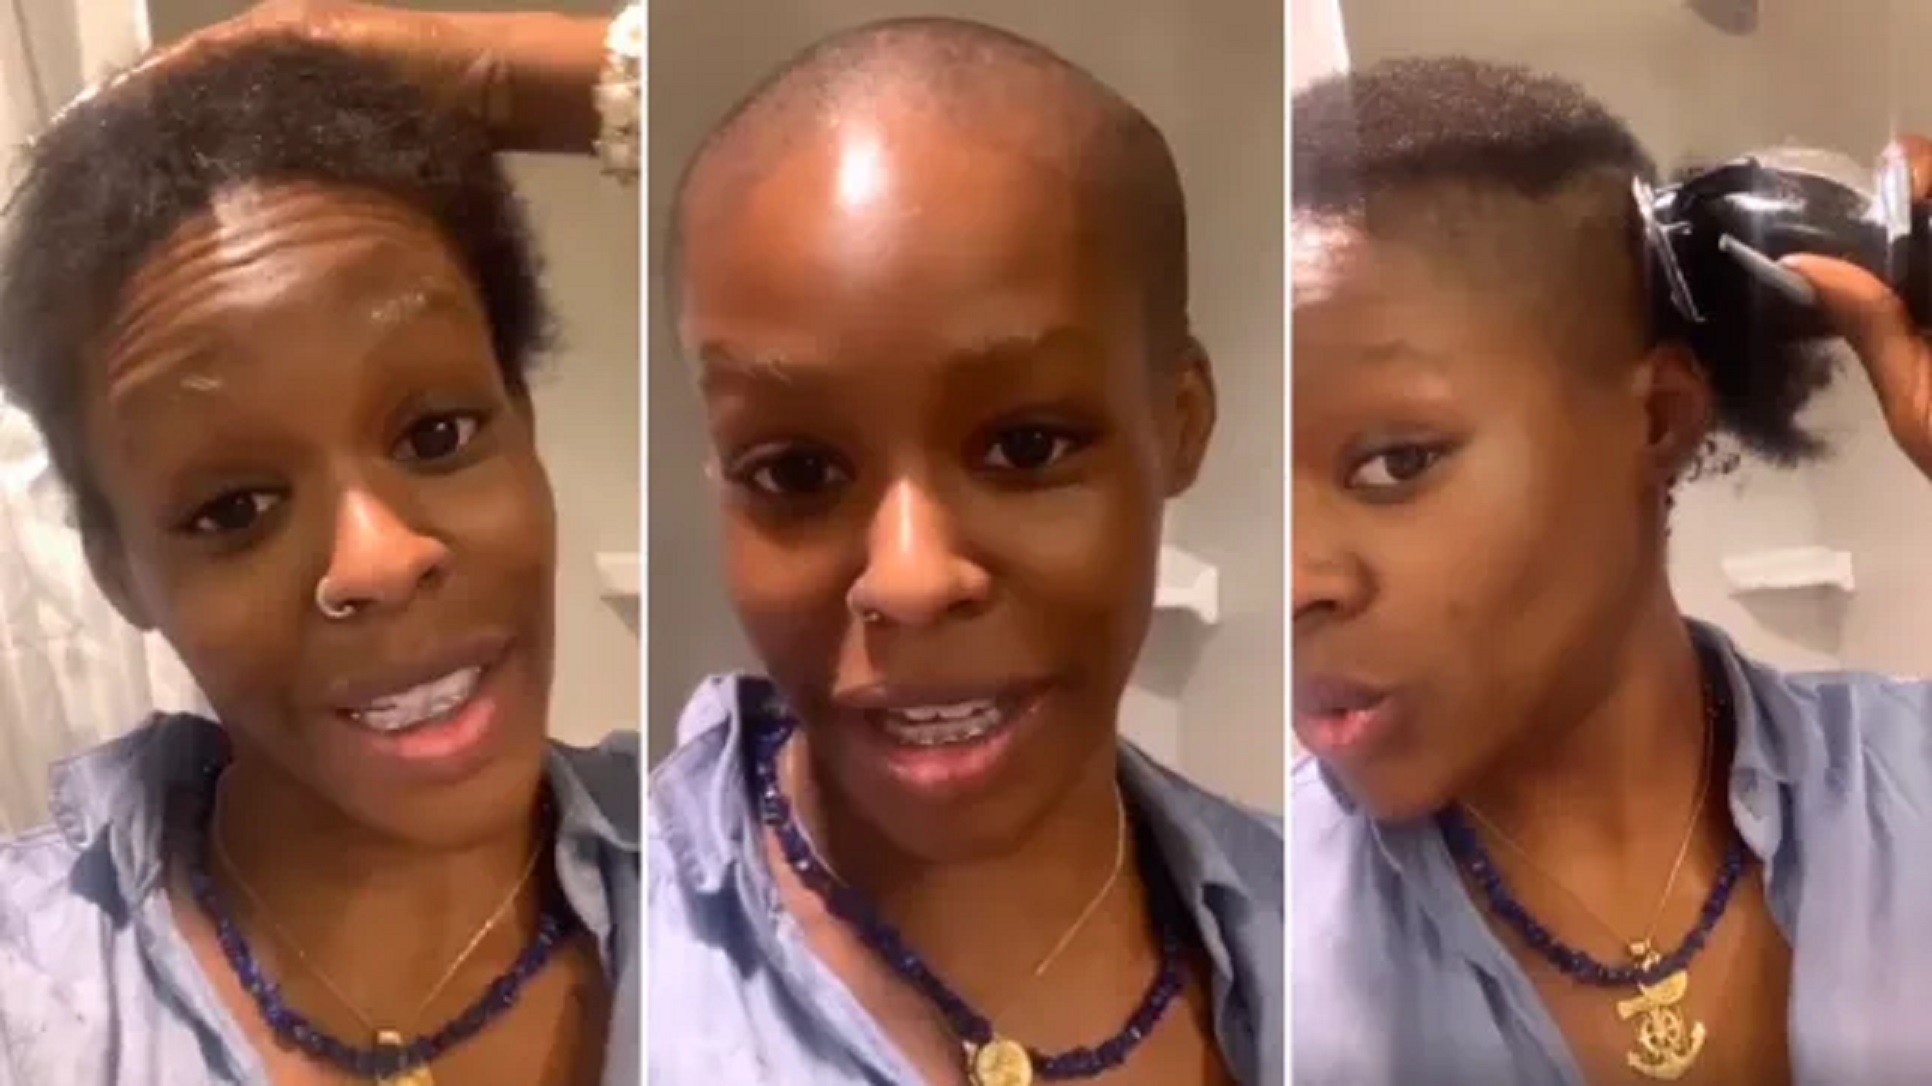 Azealia Banks Shaves Her Head While Live-Streaming For Fans